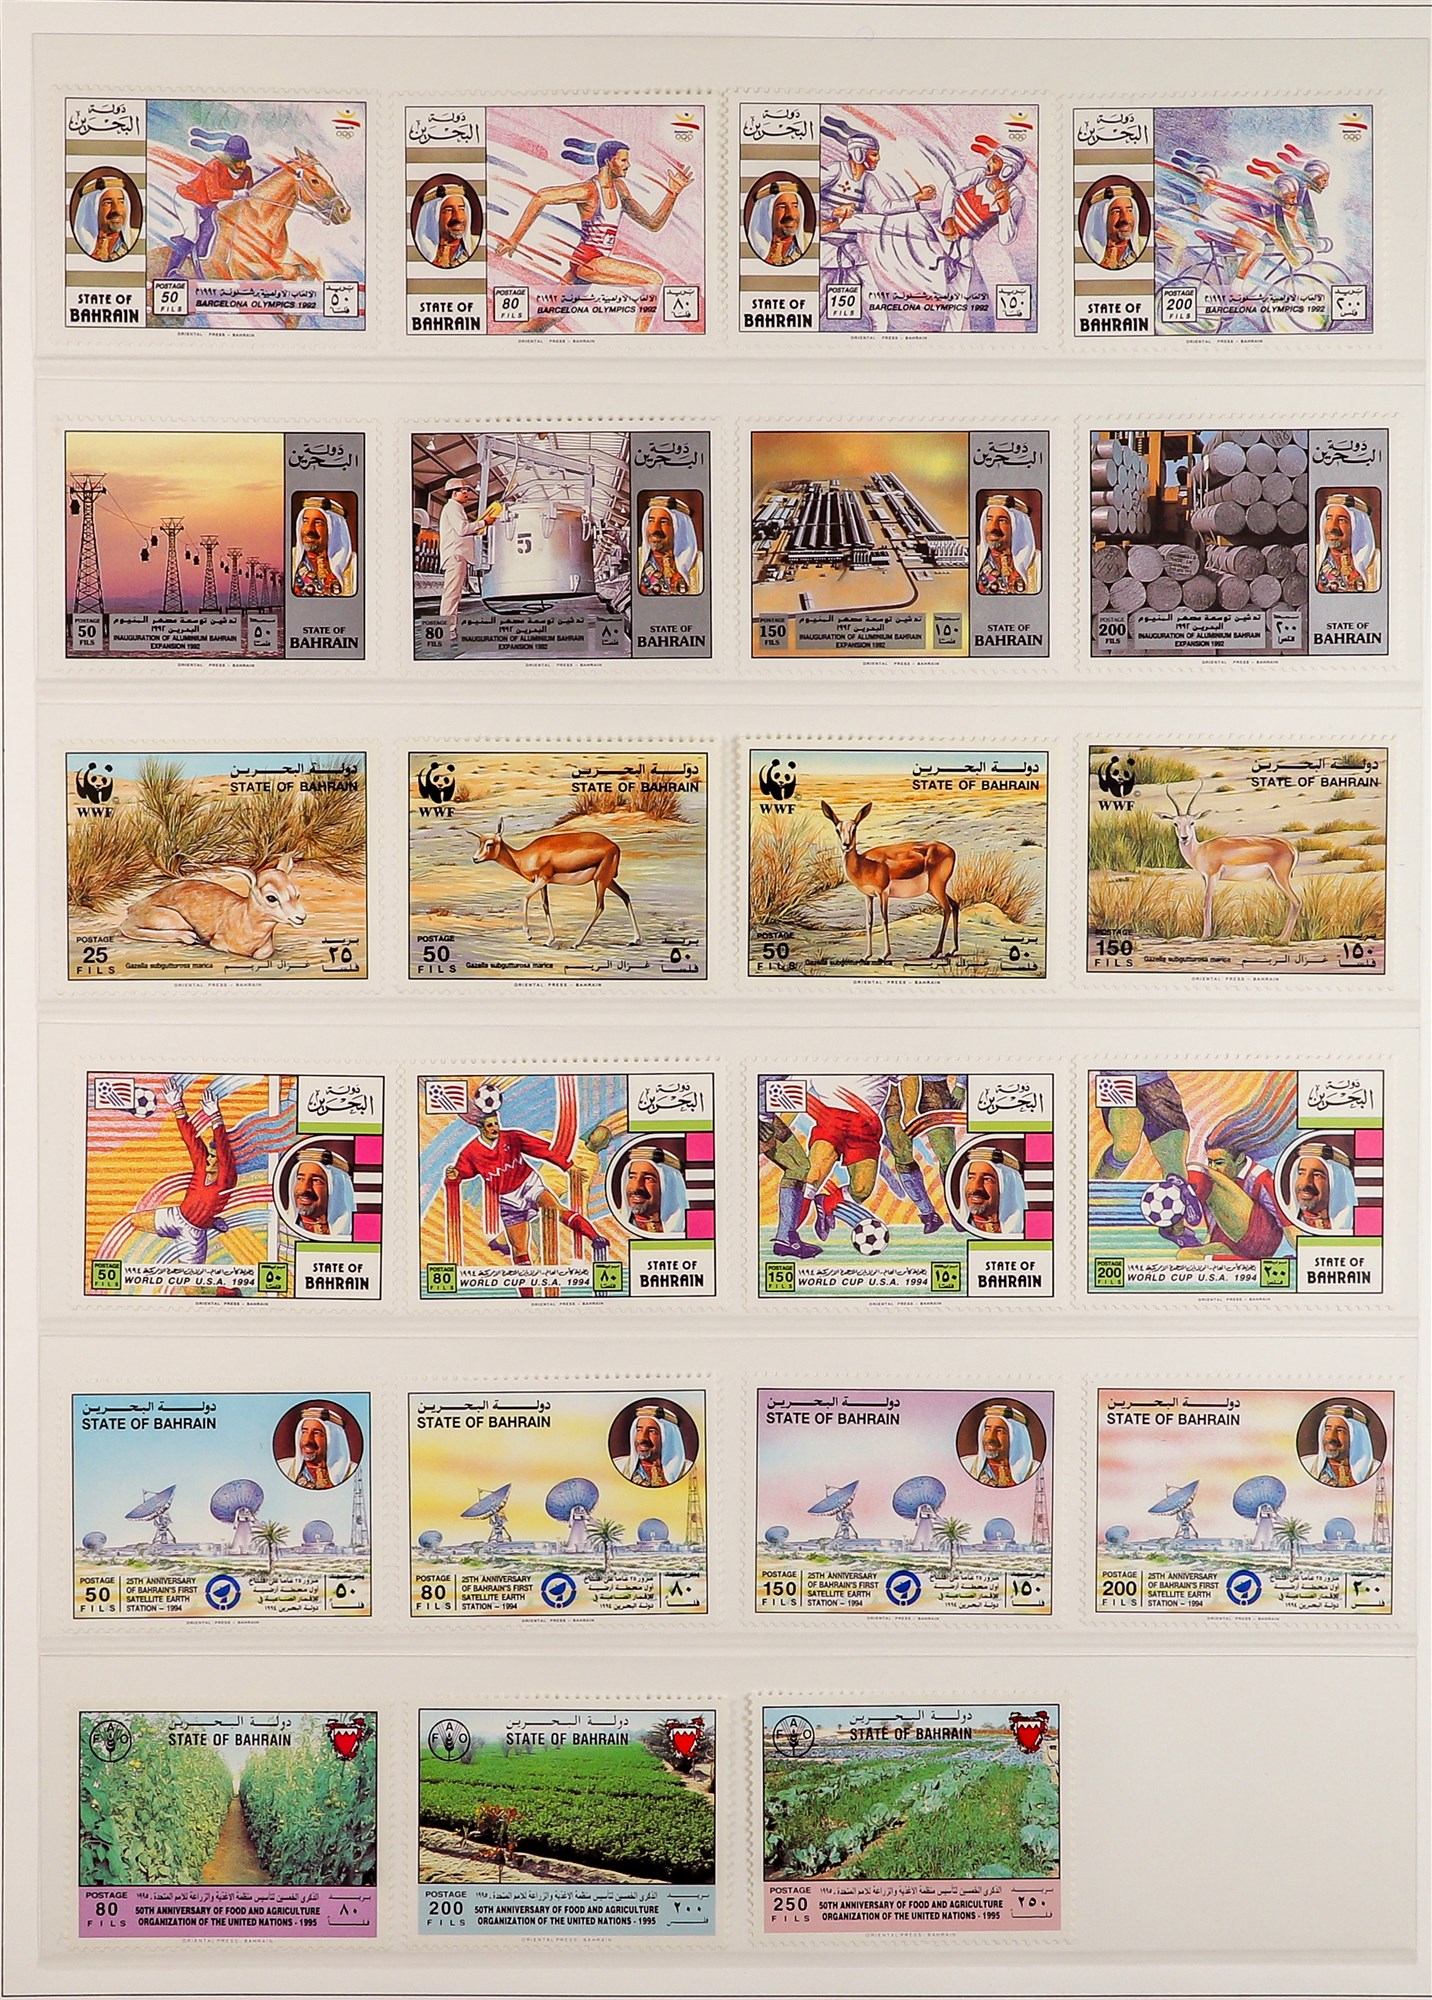 BAHRAIN 1966 - 1998 NEVER HINGED MINT COLLECTION of sets in album with slipcase, note 1966 set of - Image 13 of 16